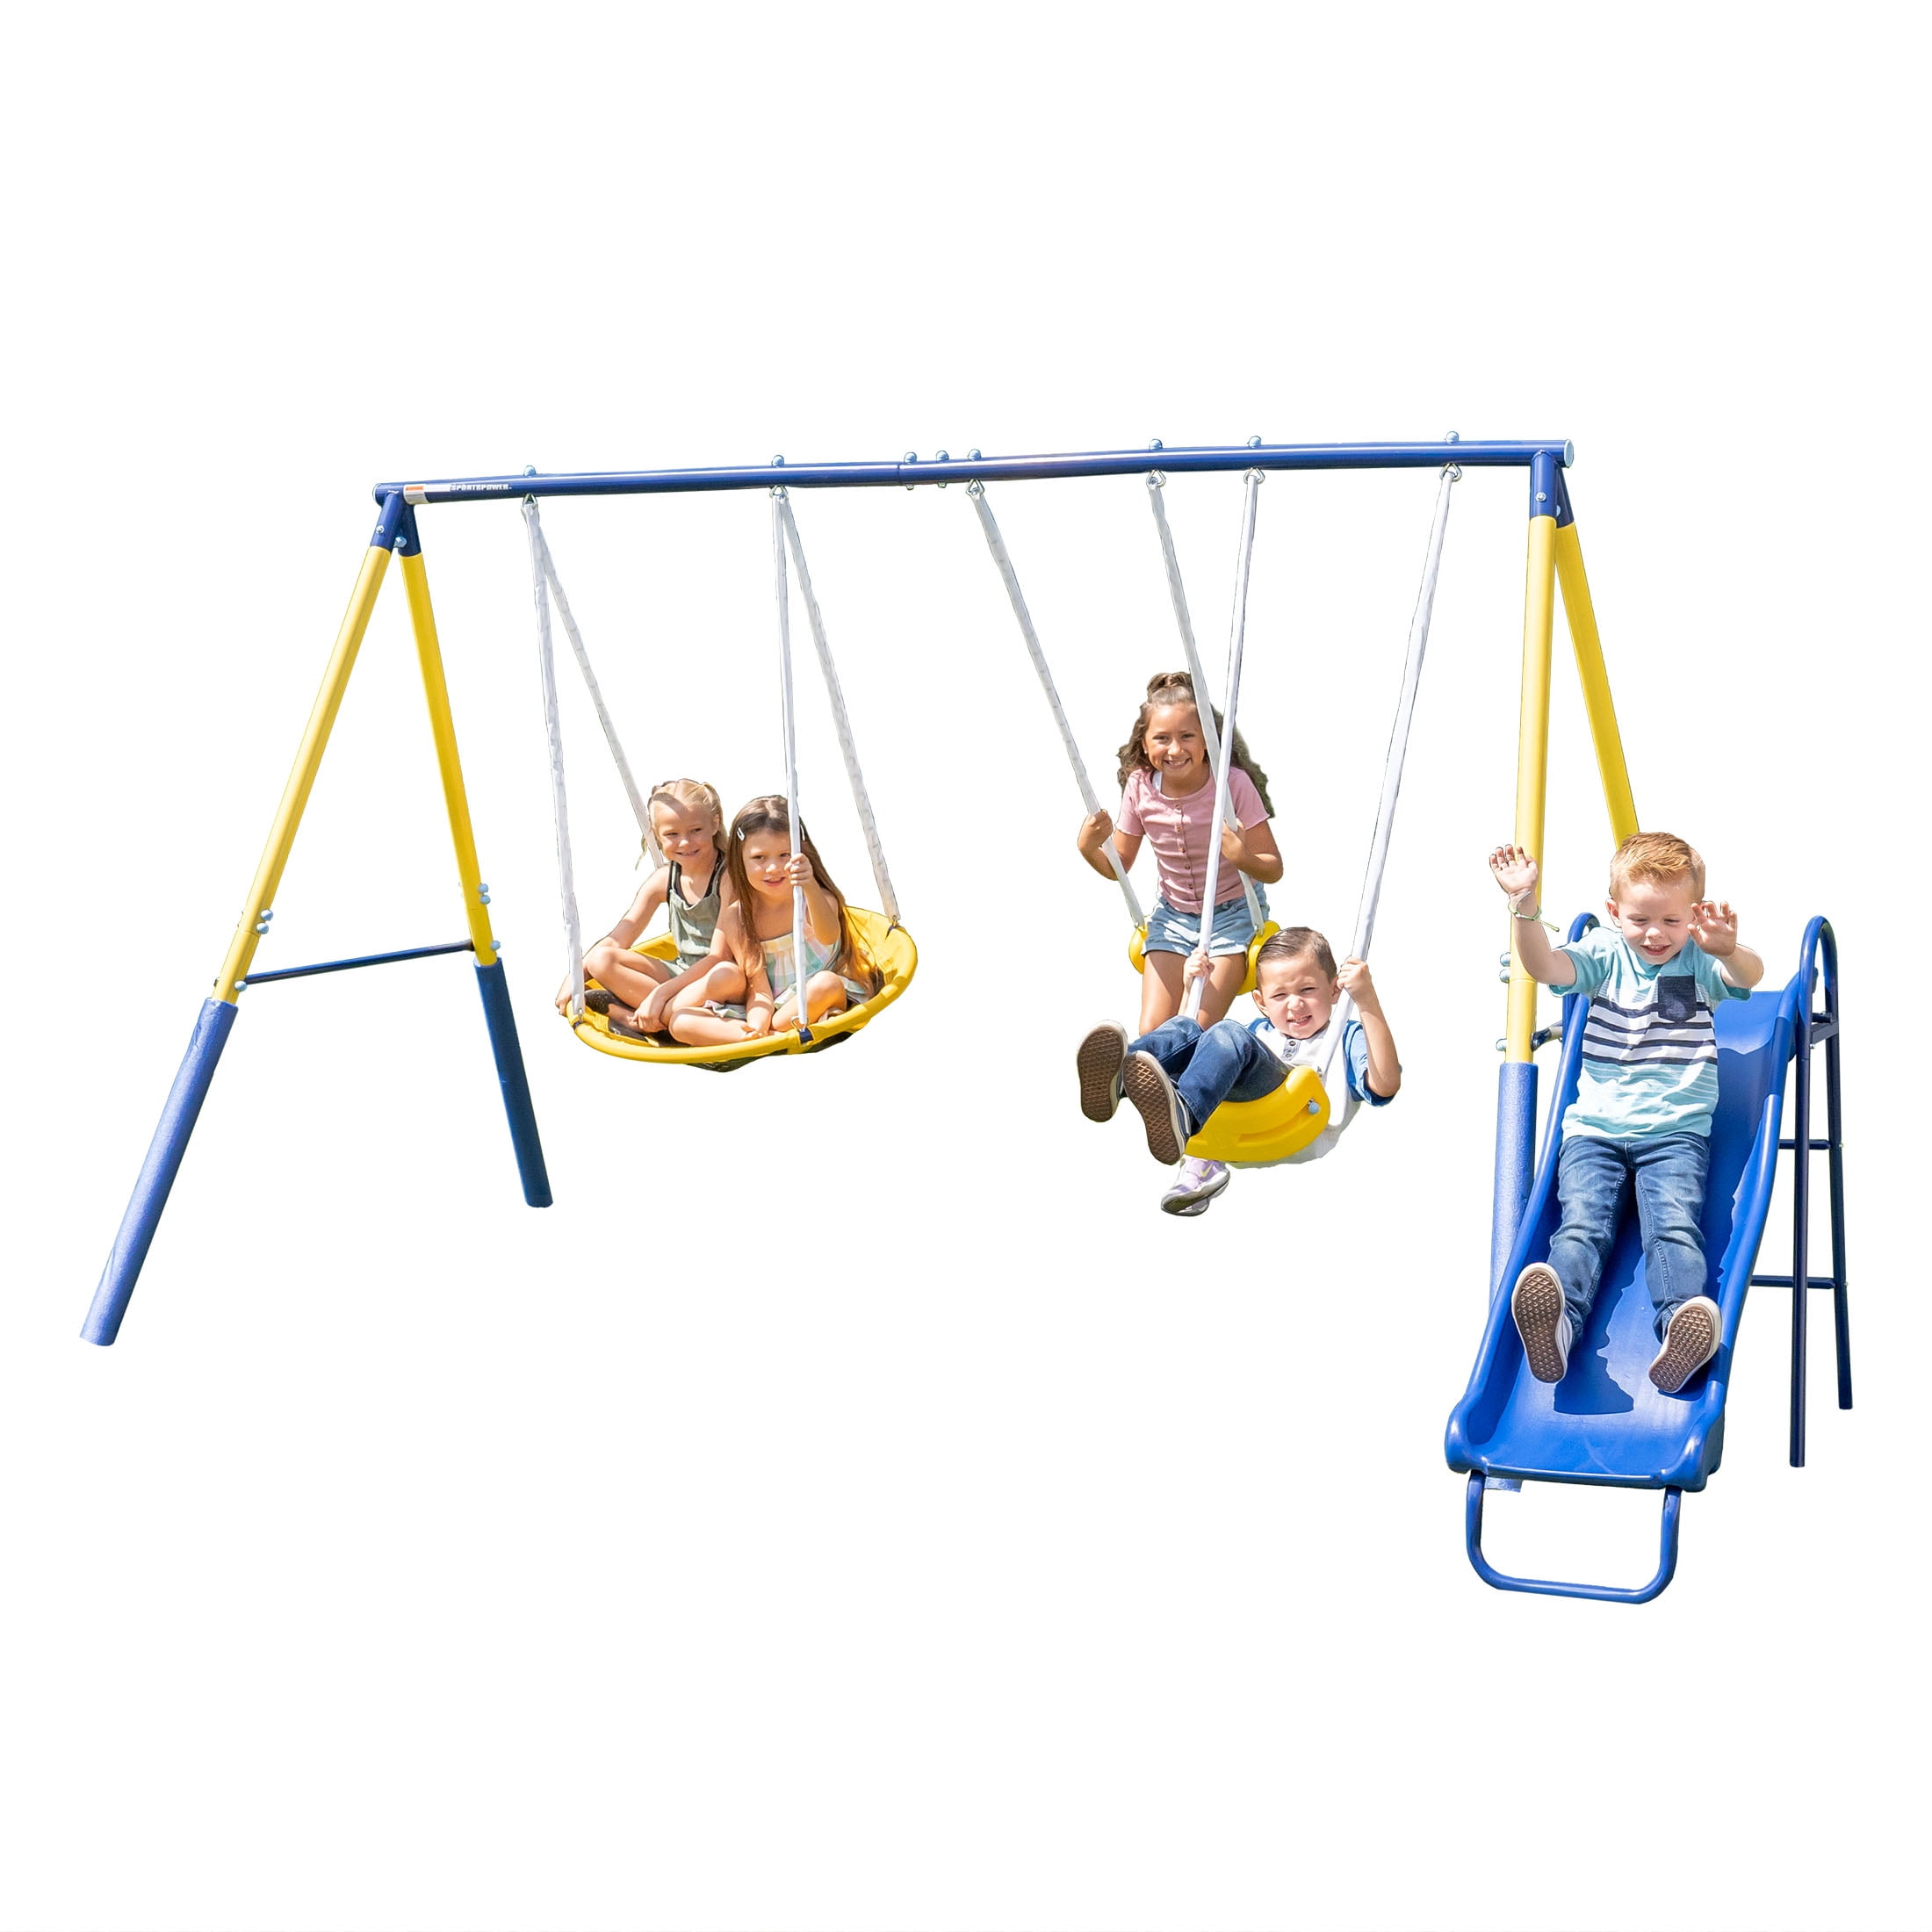 Sportspower Super Saucer Metal Swing Set with 2 Swings, Saucer Swing and a 1pc Heavy Duty Slide - 1